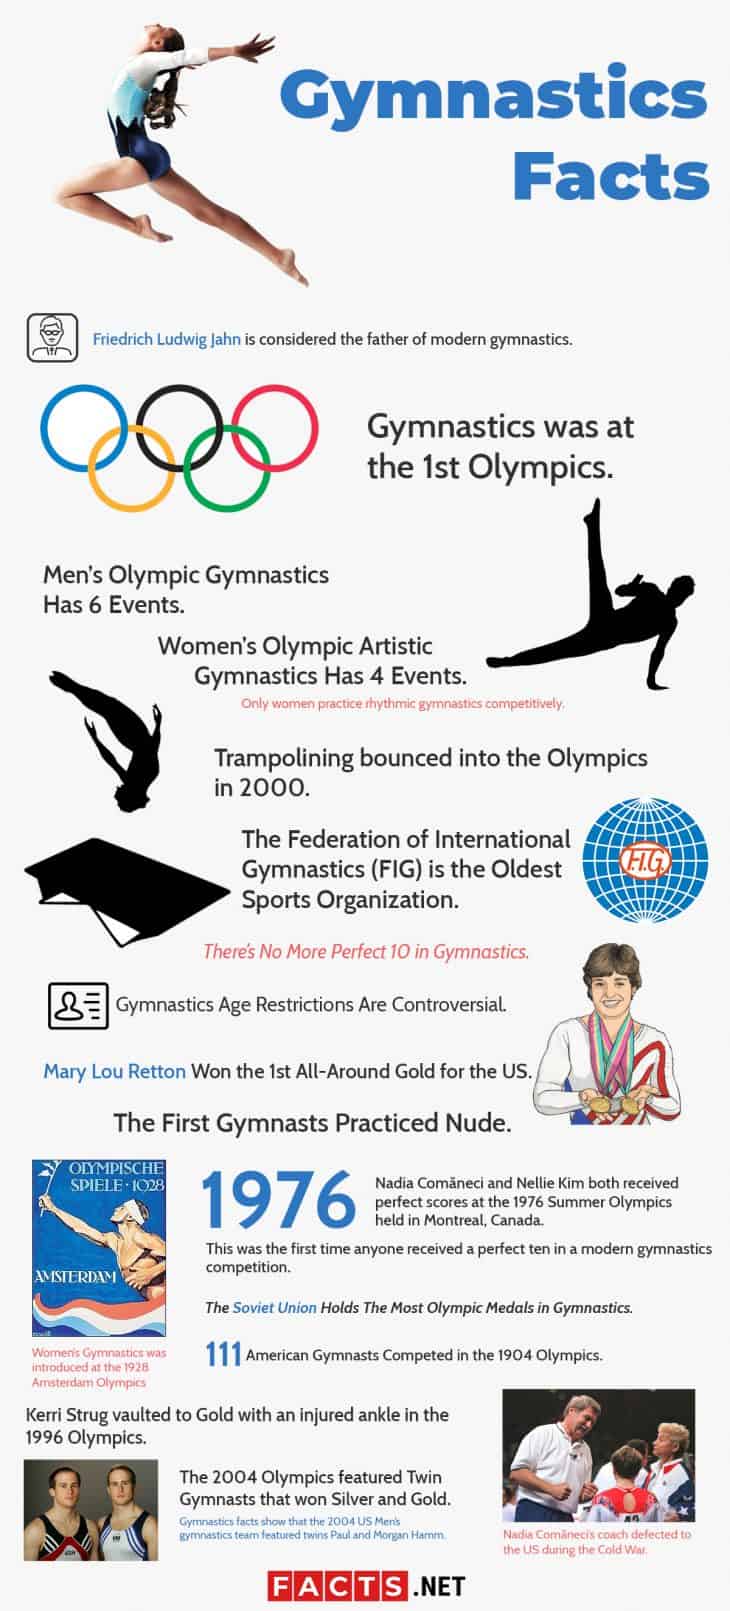 18 Facts about Gymnastics - History, Style, Rules & More | Facts.net